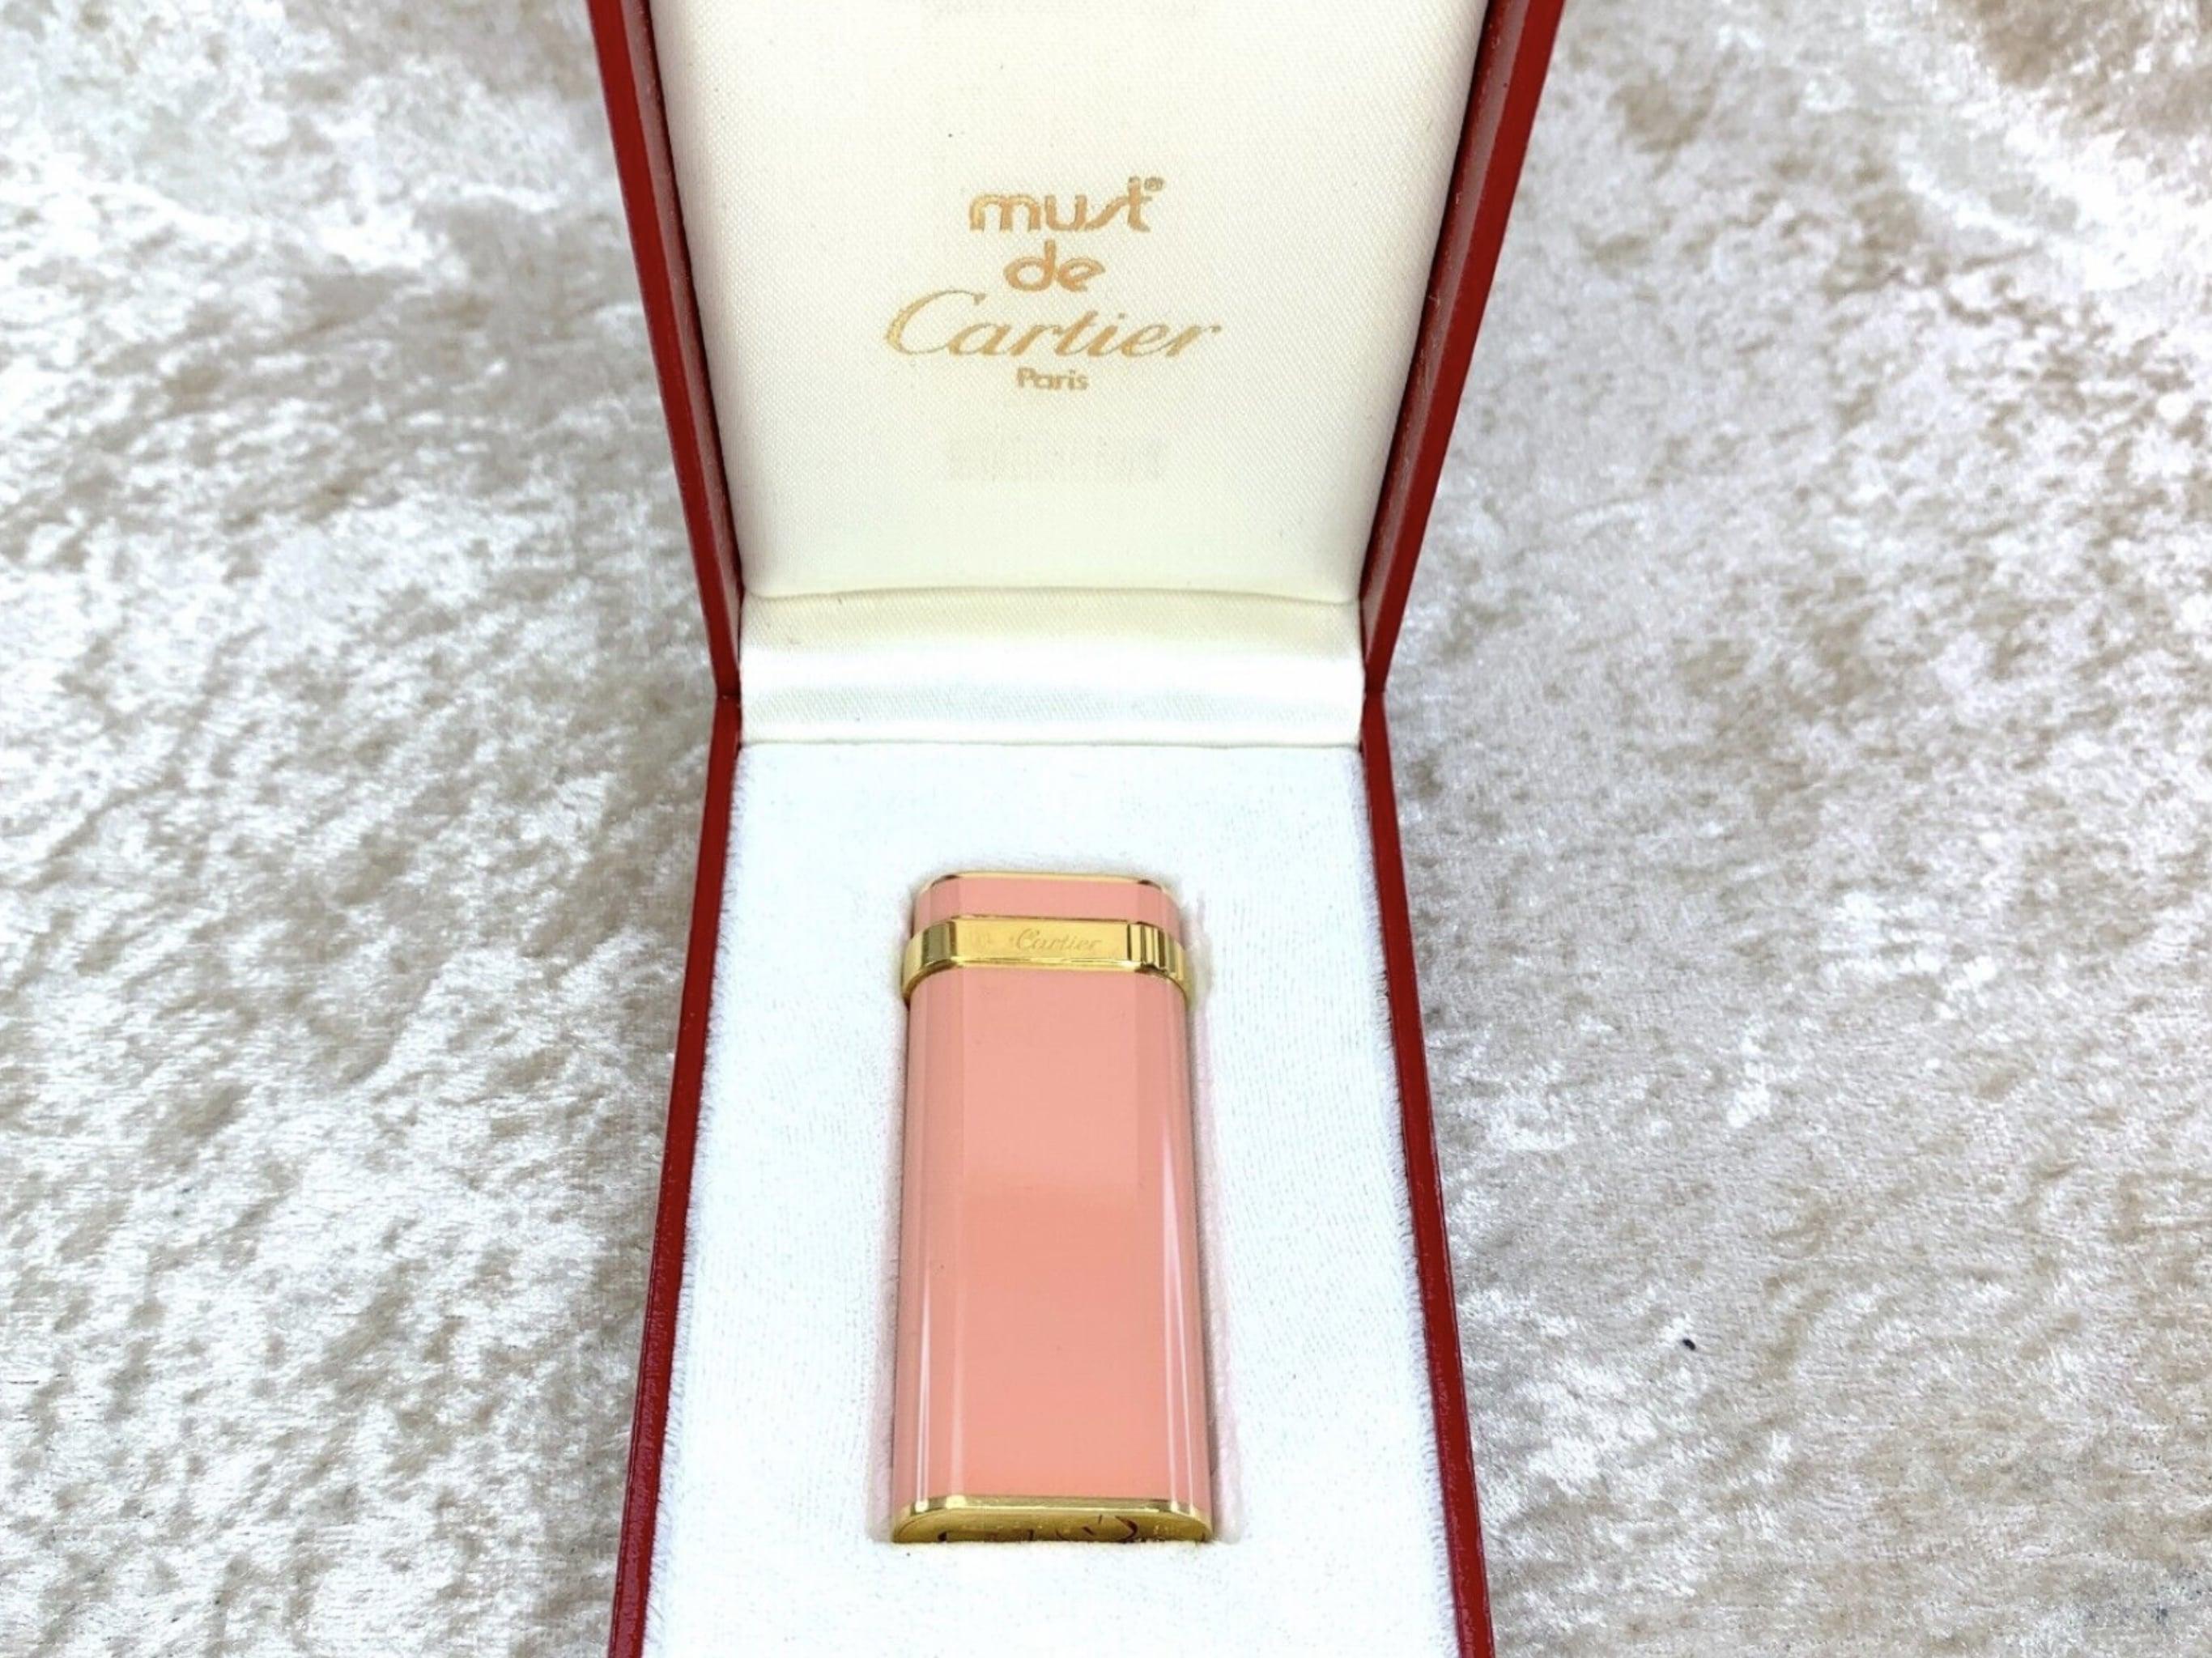 Vintage Cartier Lighter 
Short 
Oval 
Rare Pink Lacquer 
18k Gold plating 
Retro 
Circa 80s 
Paris 
In fantastic condition 
In original Cartier case 
The lighter sparks, ignites and flames 